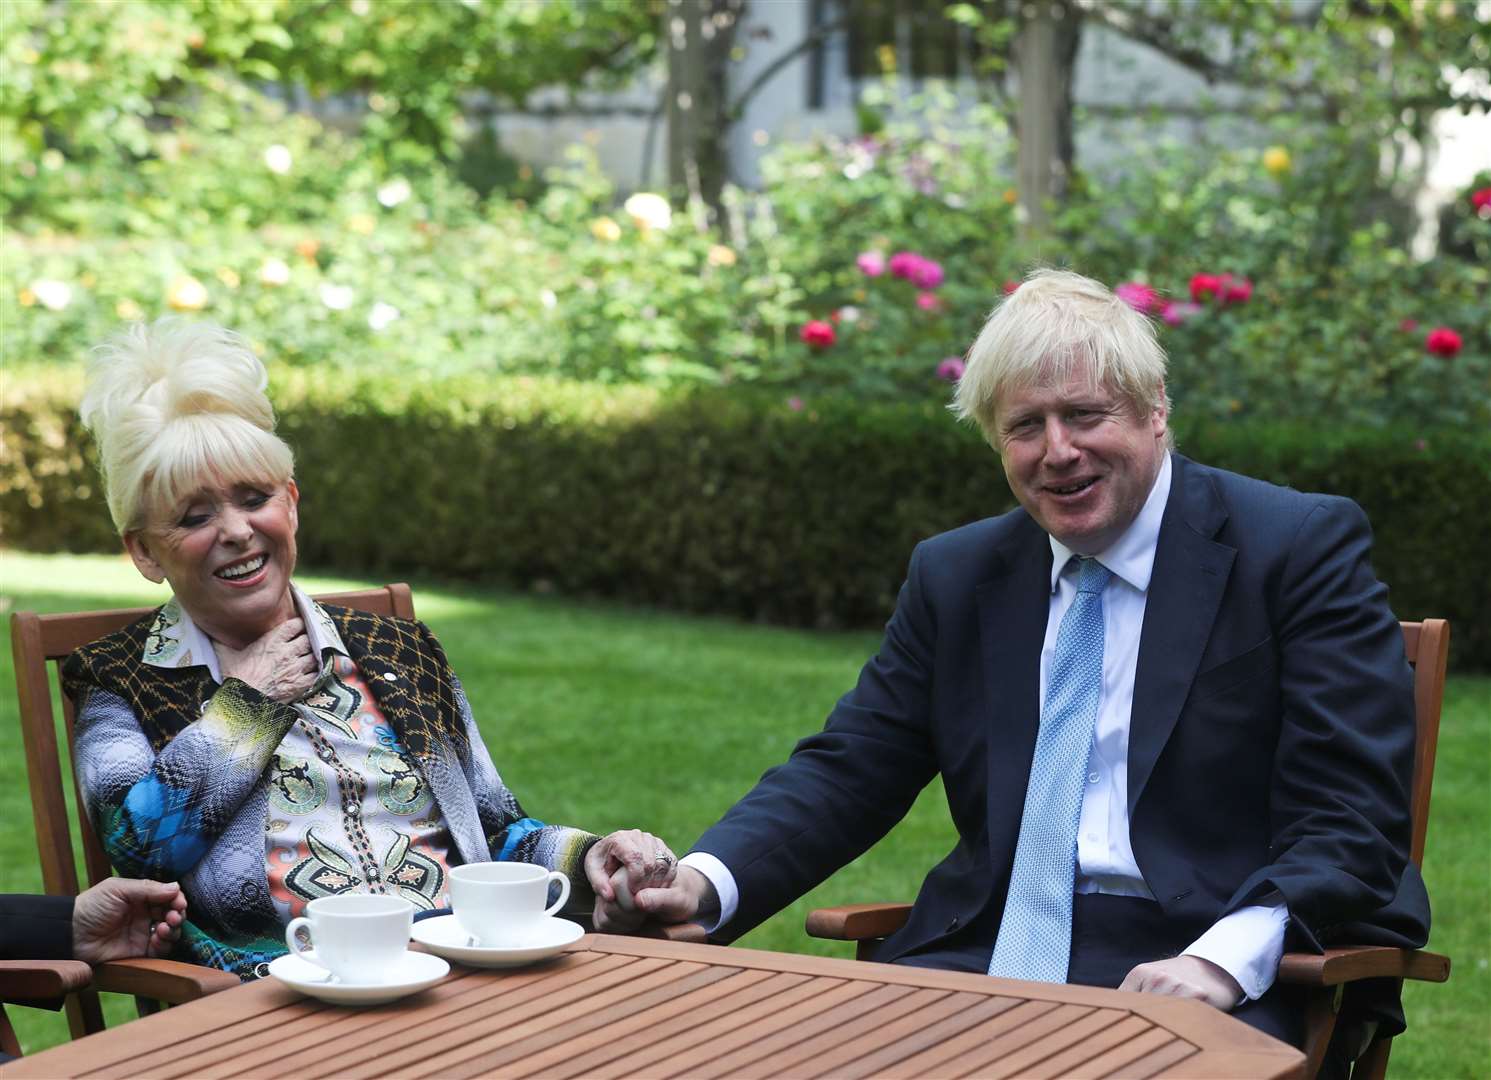 Dame Barbara Windsor met former prime minister Boris Johnson in the Downing Street garden to discuss dementia care (PA)